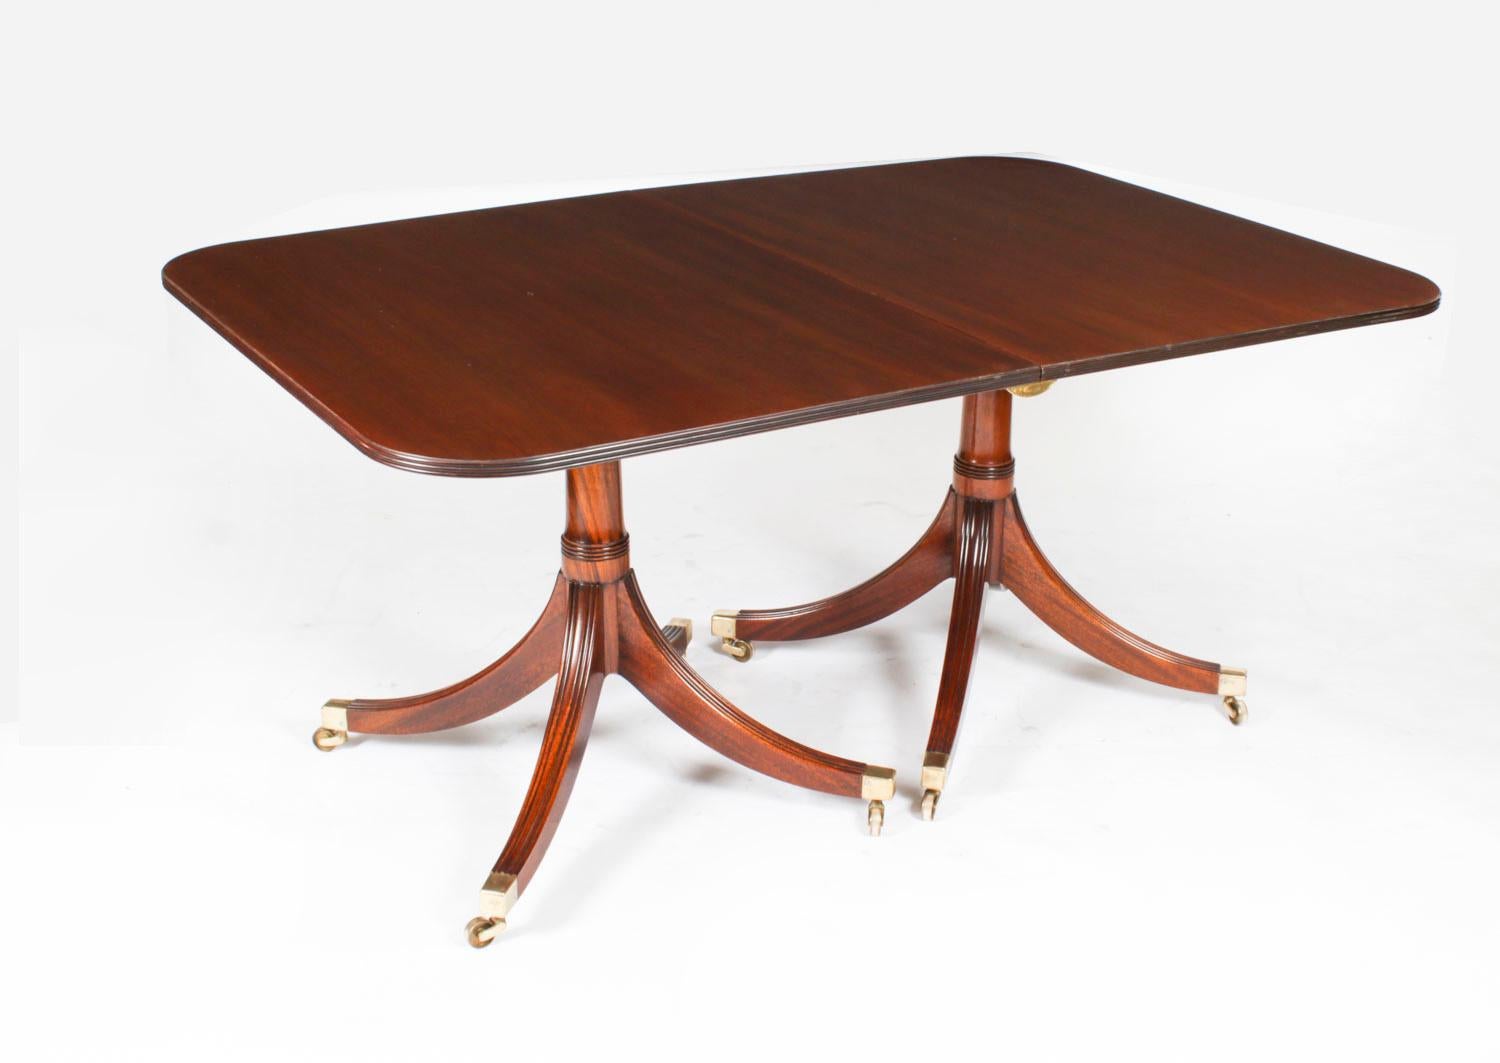 This is  a fabulous Vintage Regency Revival dining table by the master craftsman, William Tillman, Circa 1975 in date.

The table is made of stunning solid mahogany and is raised on twin 